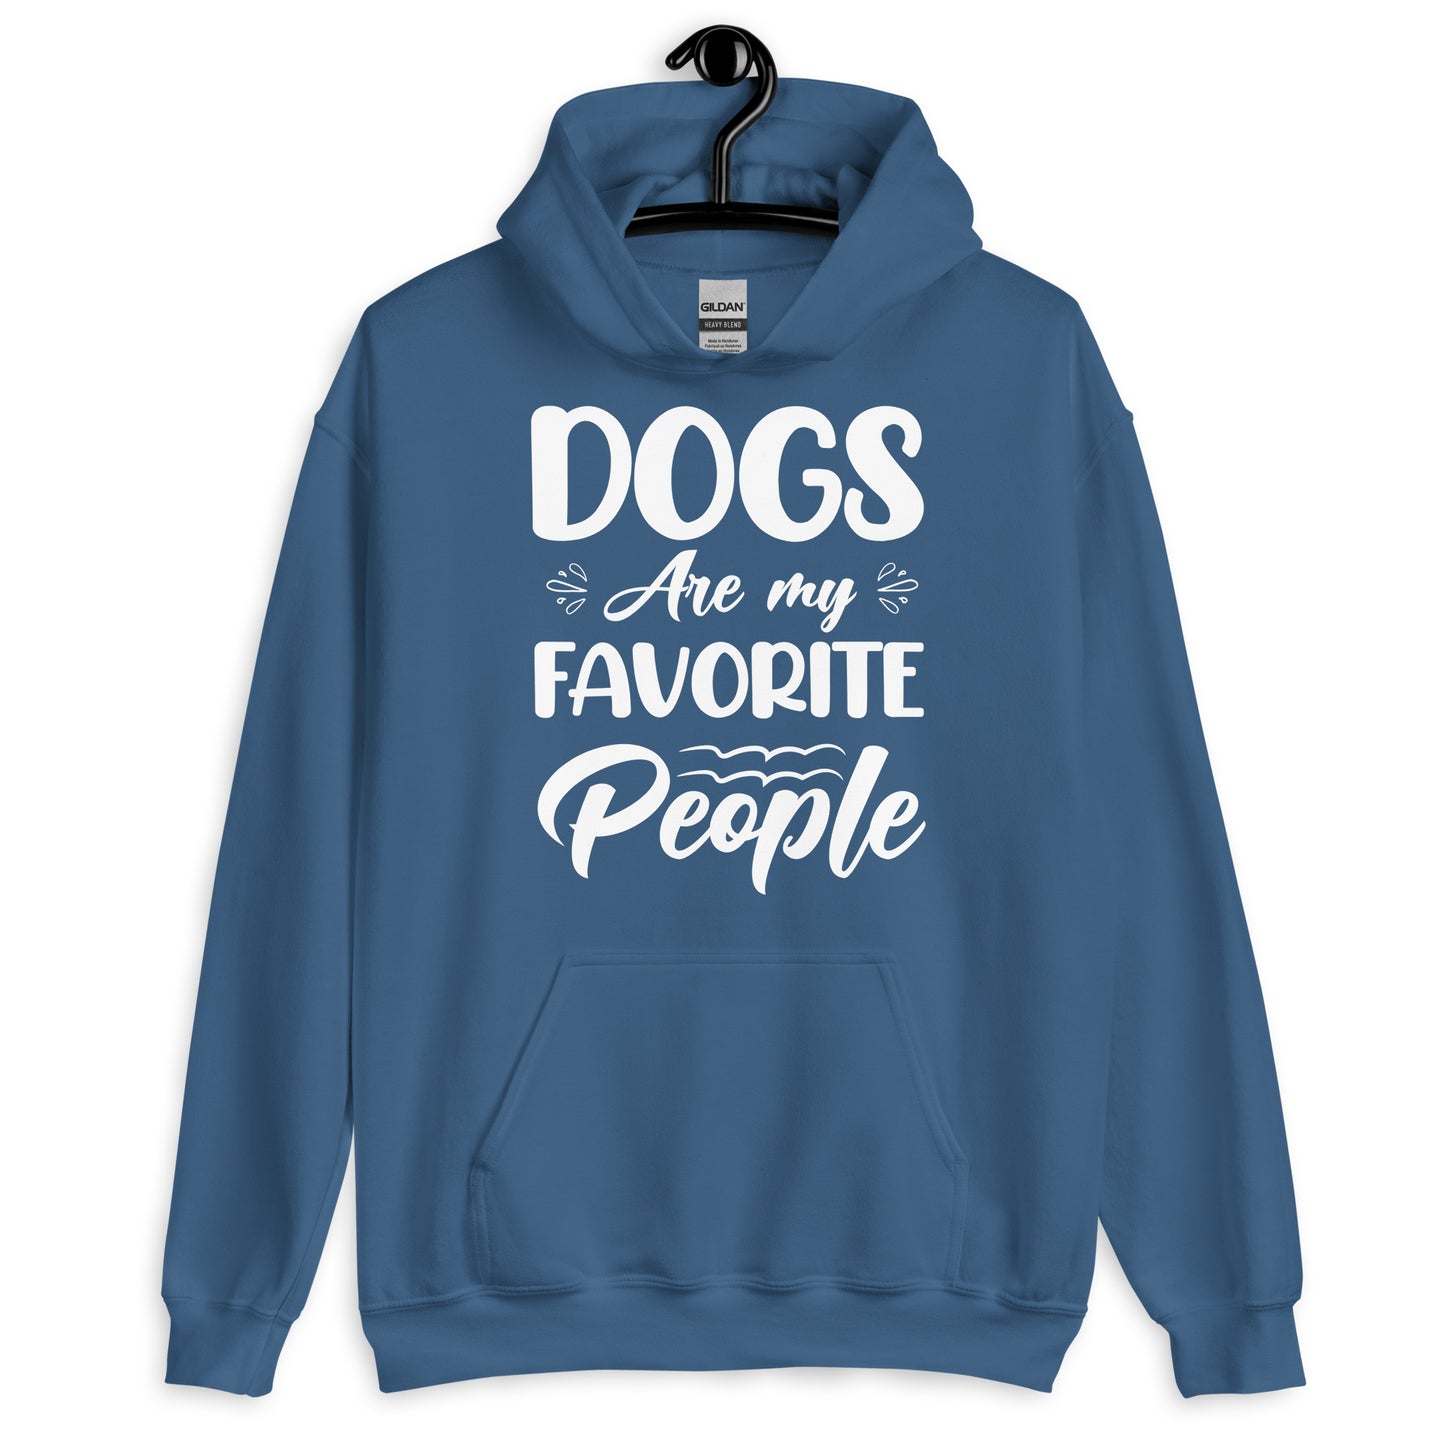 Dogs are My Favorite People Hoodie